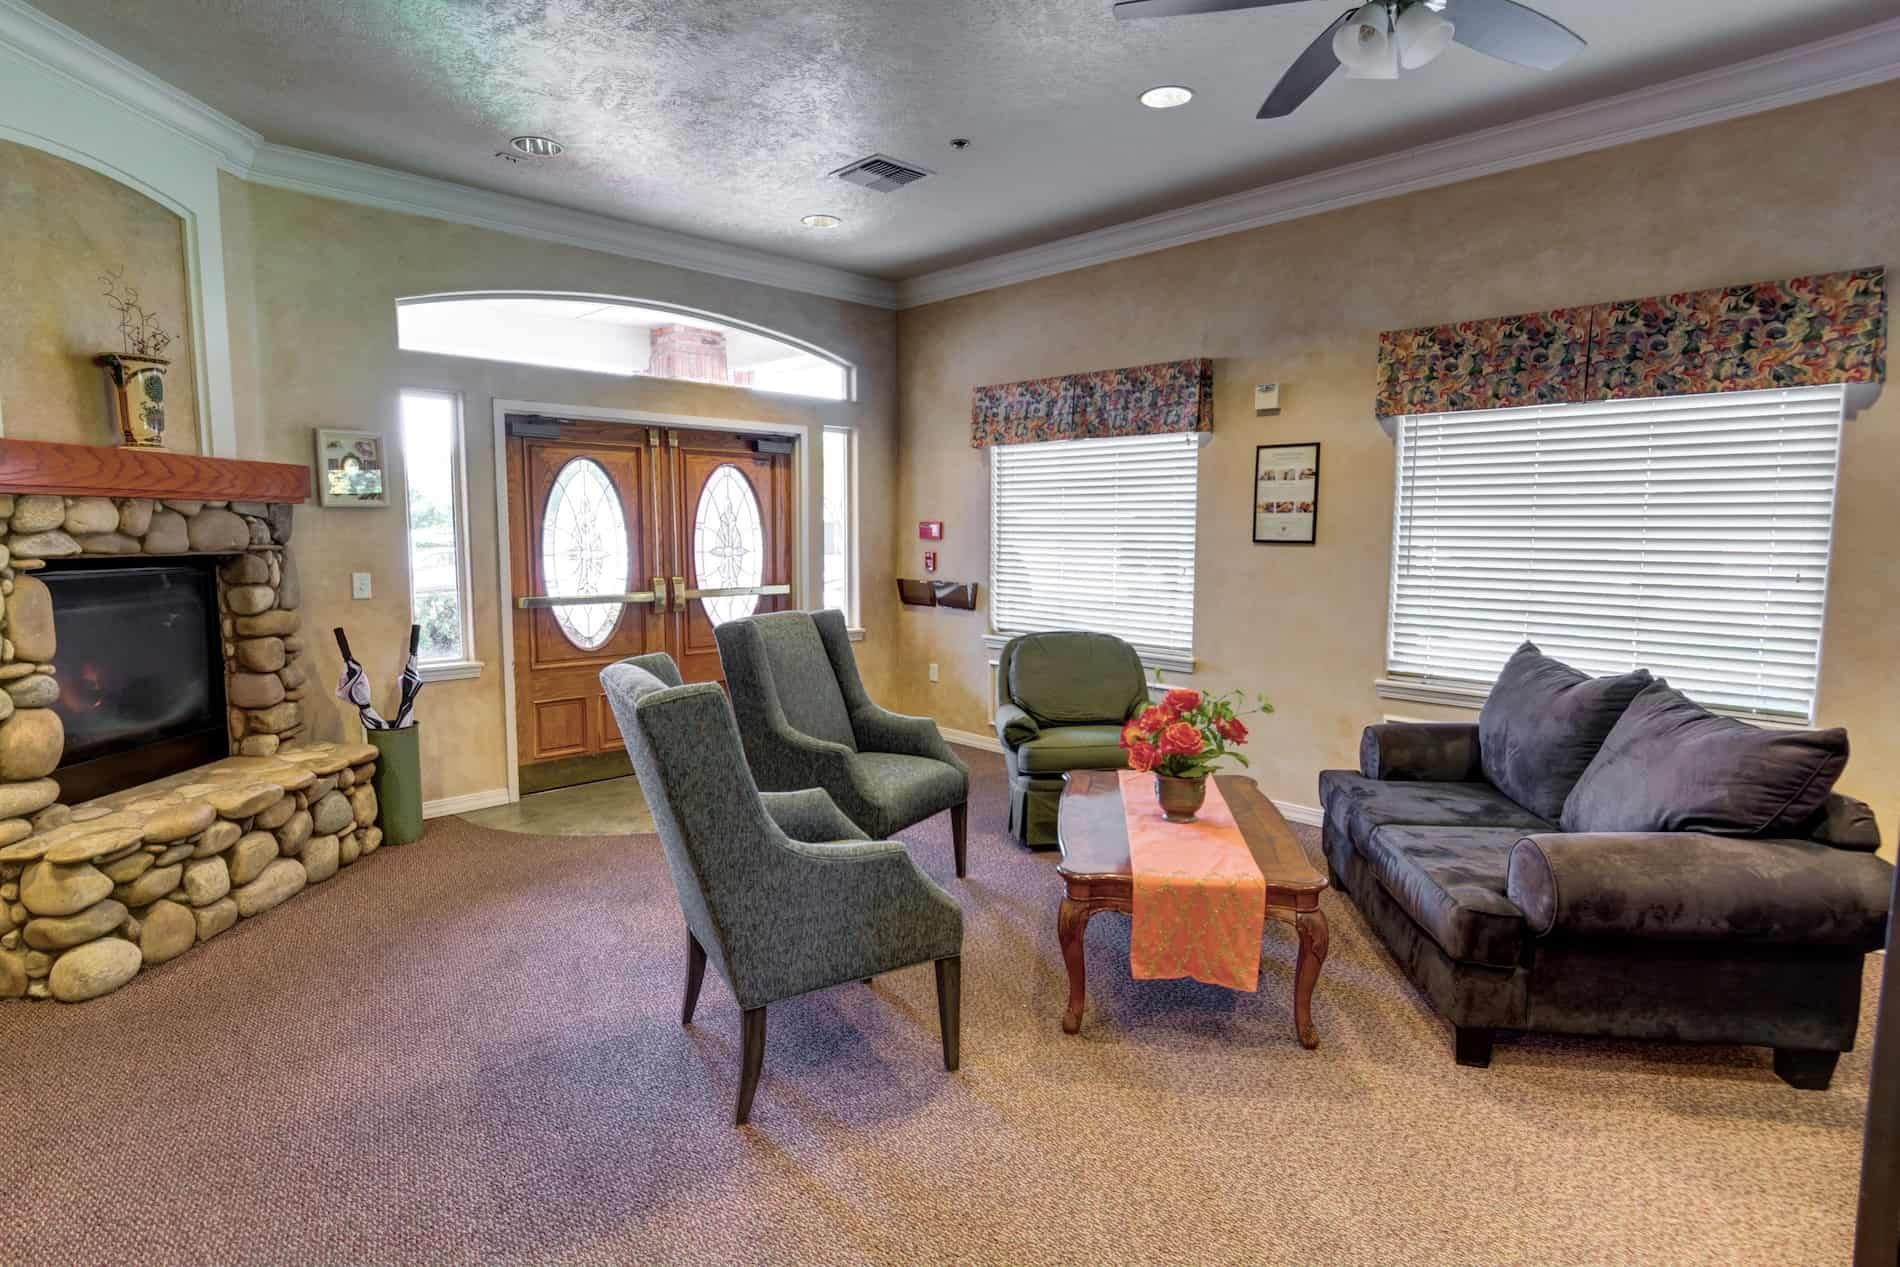 Interior view of Overland Court Senior Living with modern decor, electronics, and cozy living room.